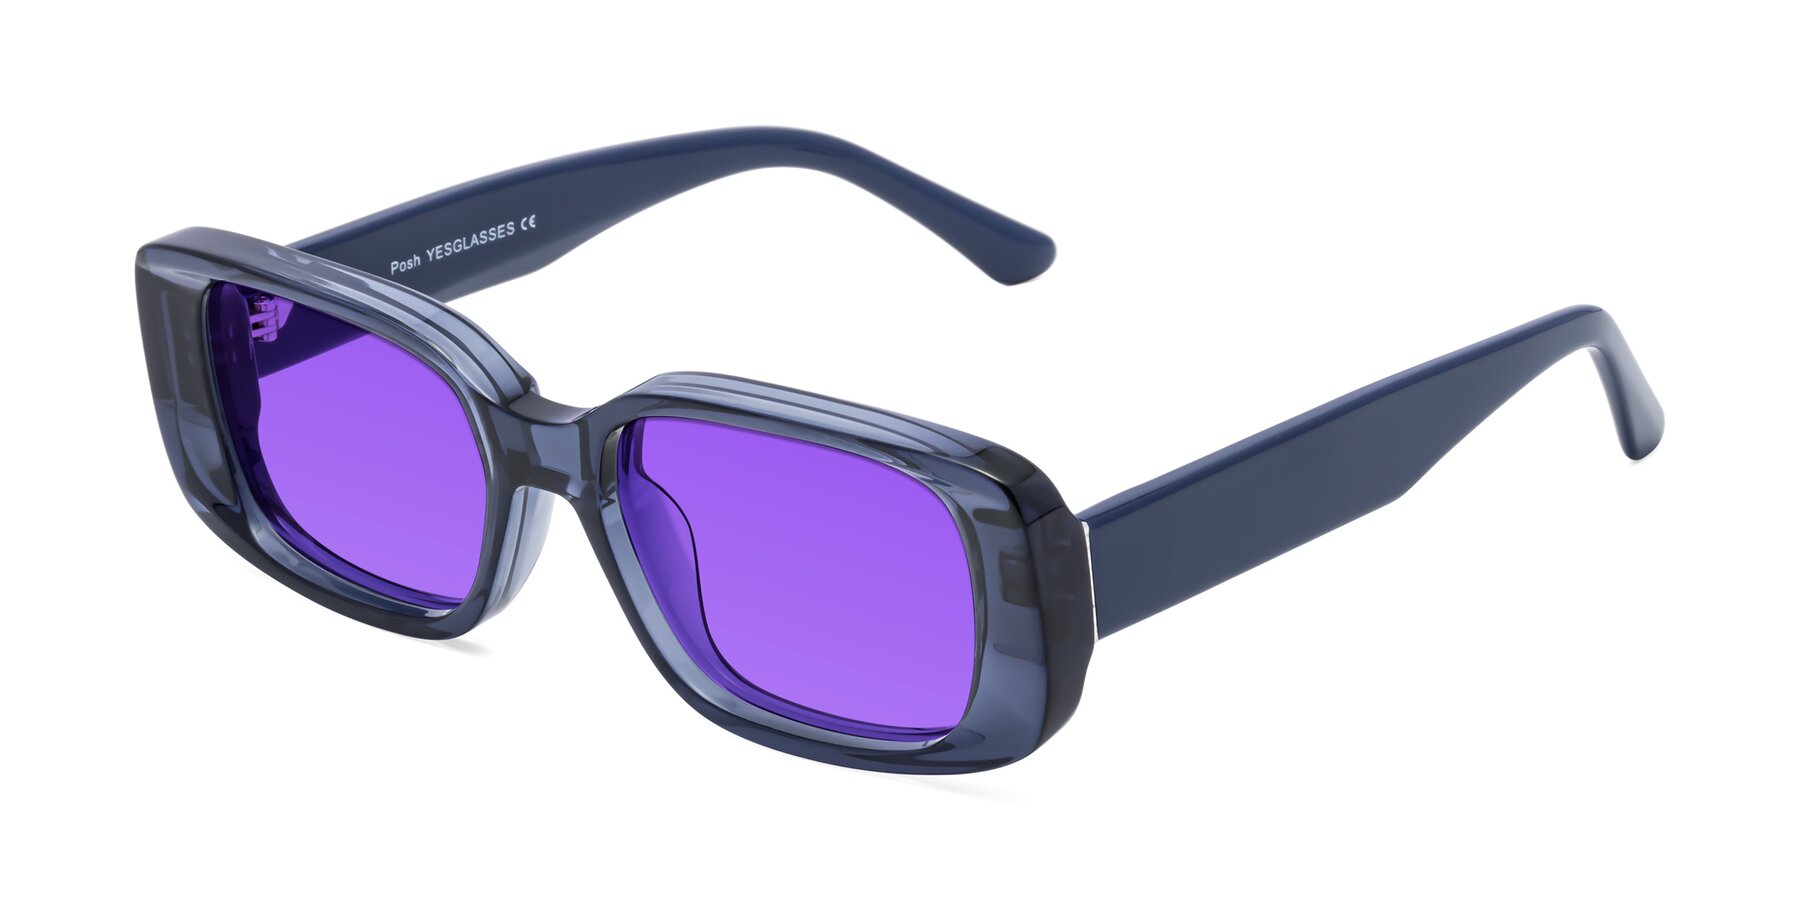 Angle of Posh in Translucent Blue with Purple Tinted Lenses